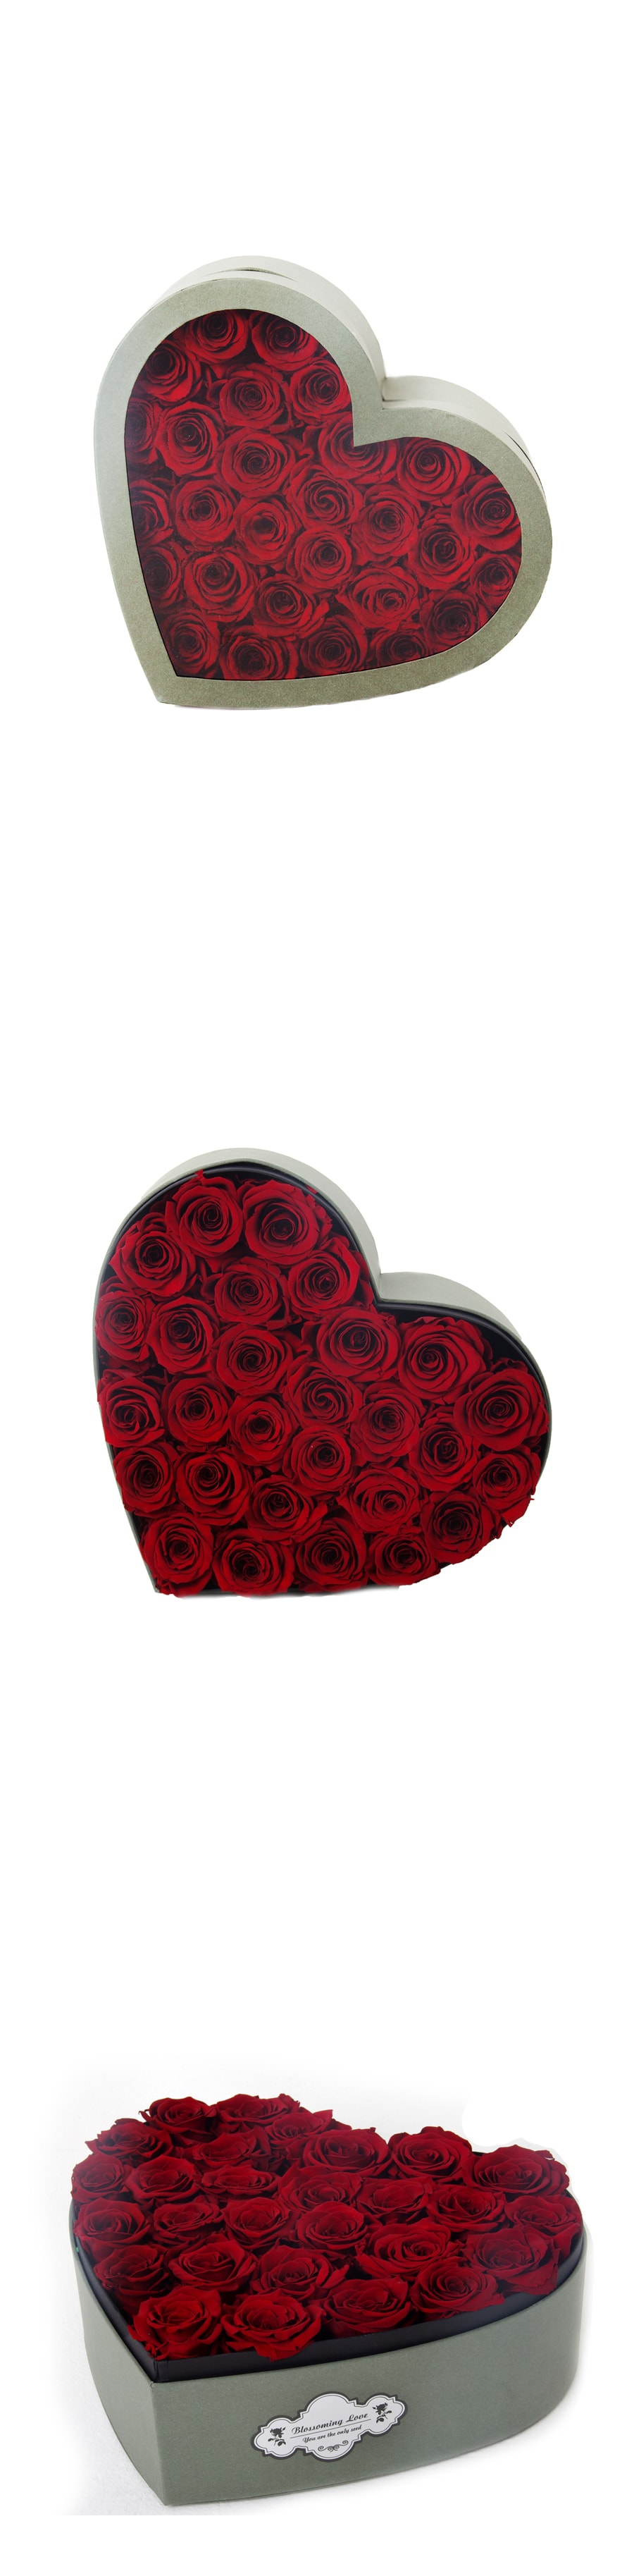 See-through heart-shaped box -Red Roses